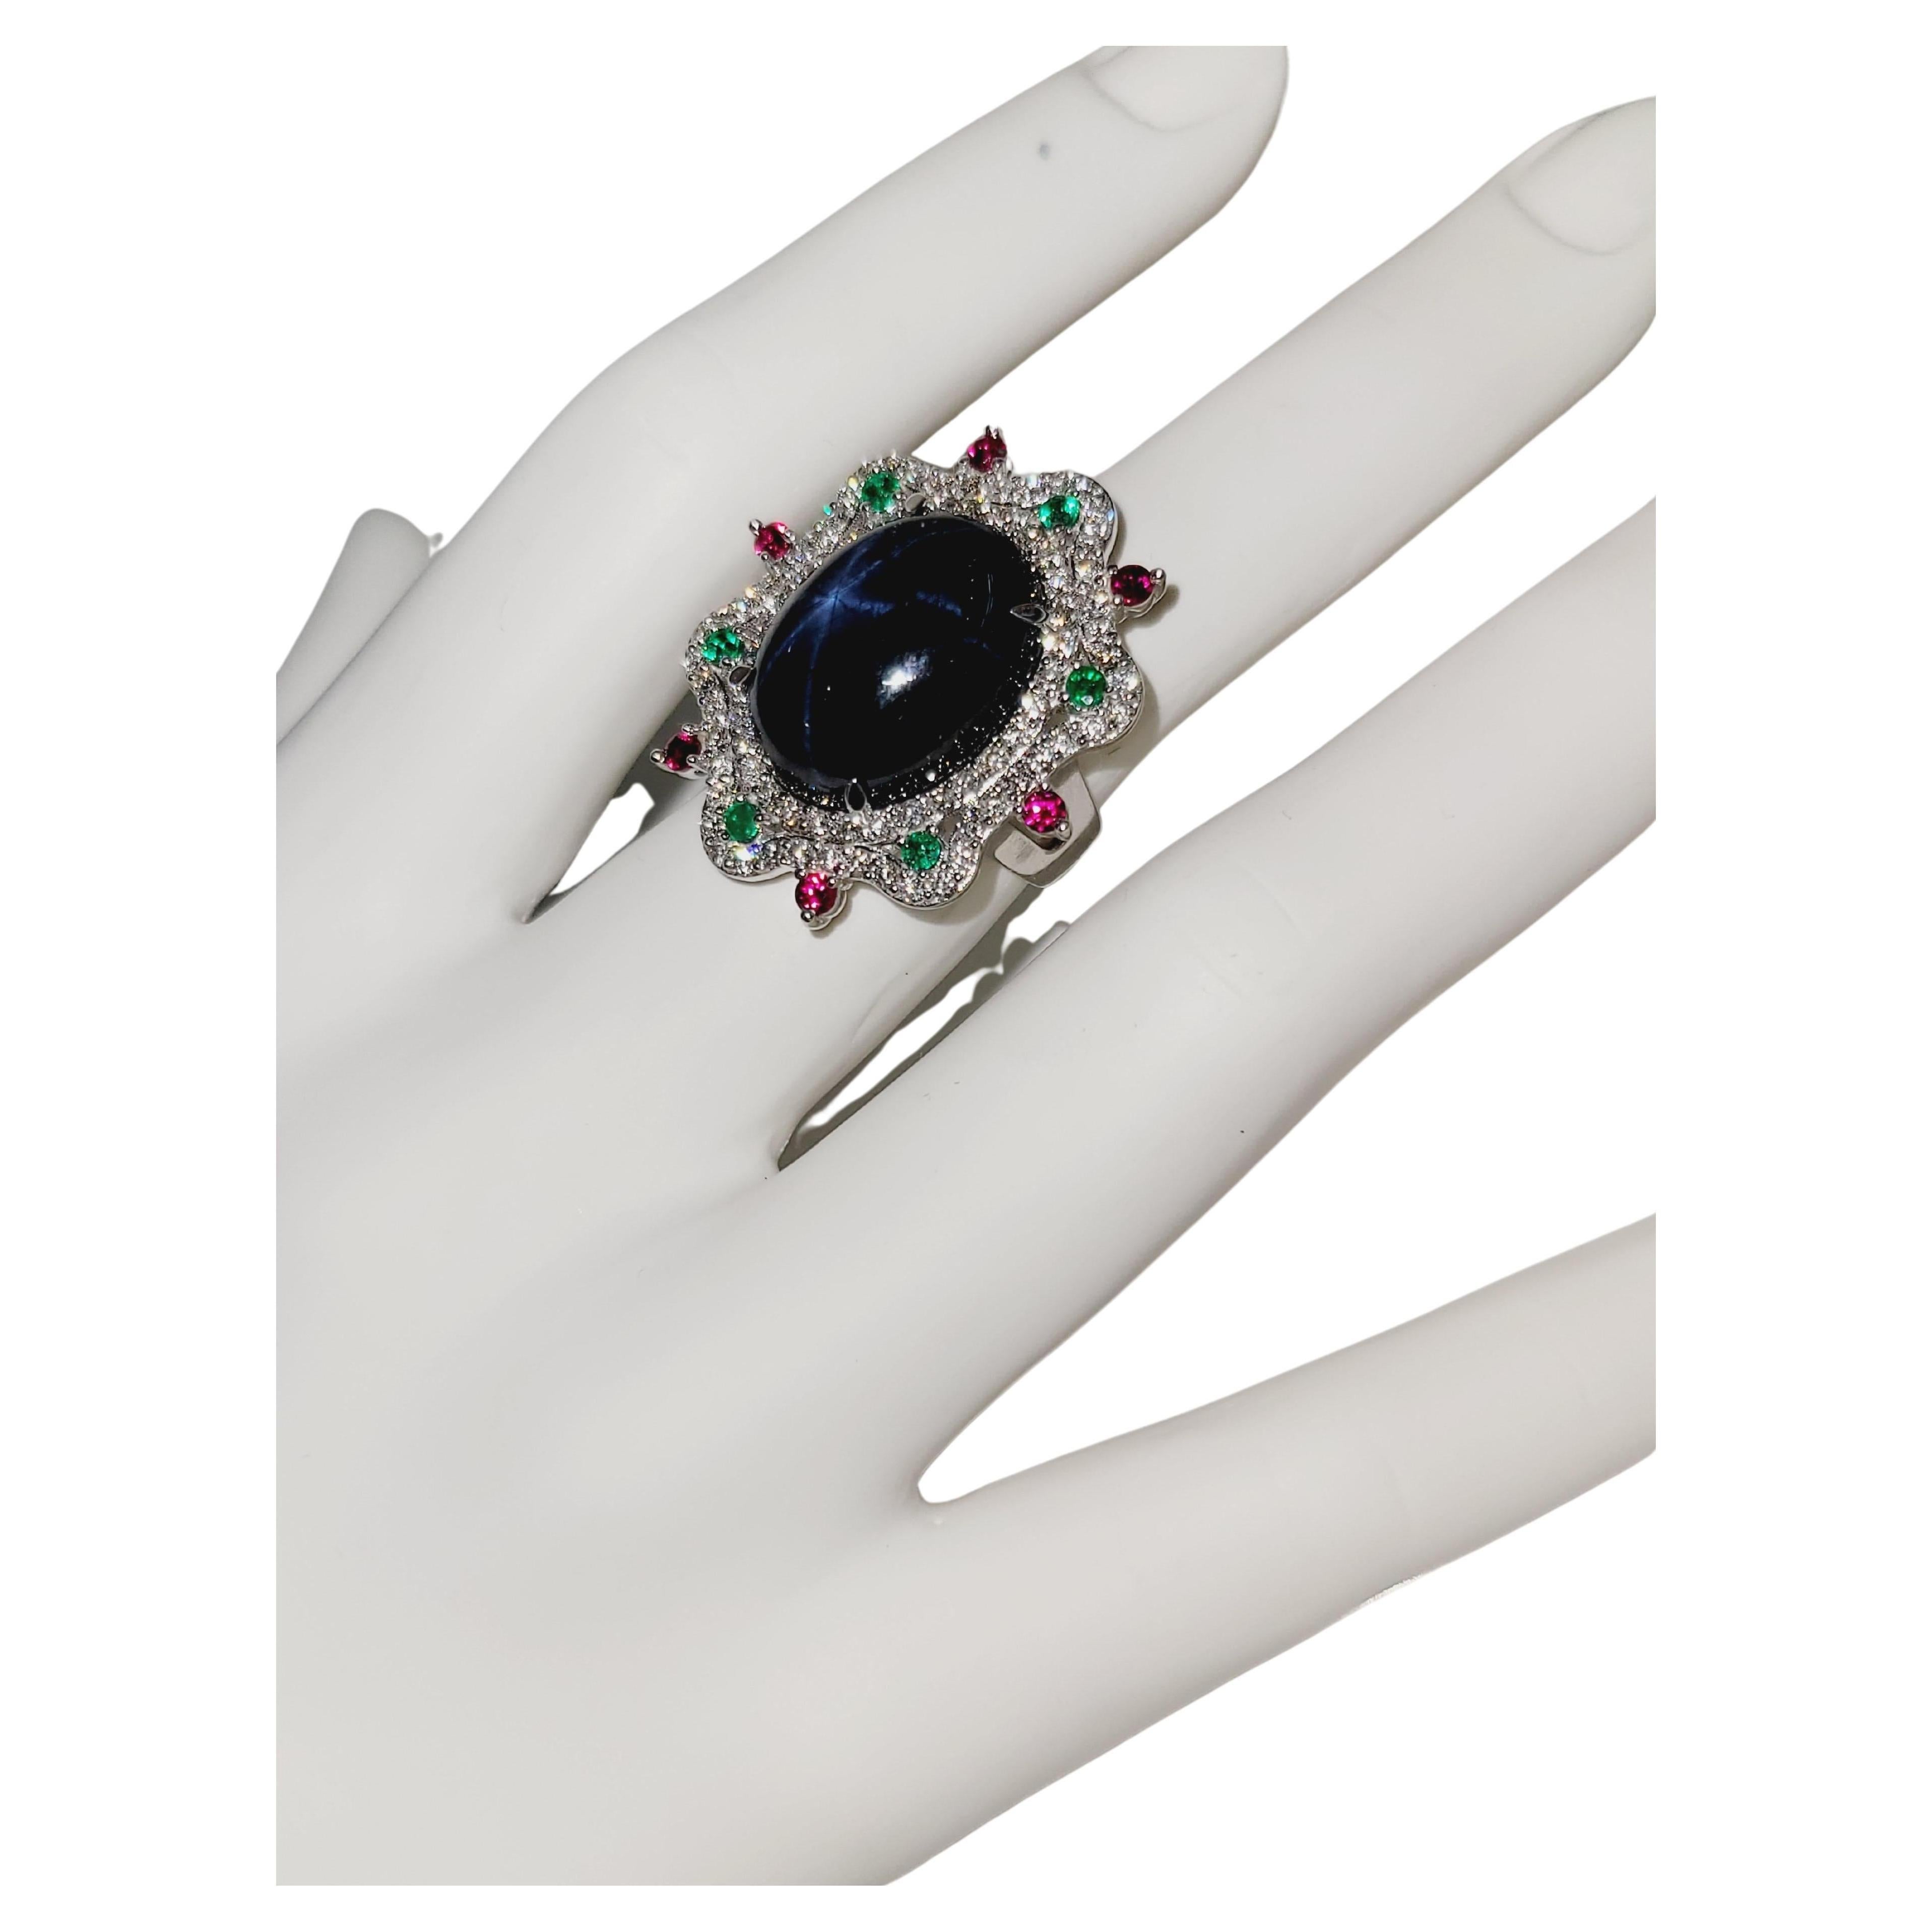 Hand Made Star Sapphire 
14K White Gold
Gender Women
Condition New
Ring Size 5.75
Main stone Sapphire star 39.00ct
Diamonds 2.45ct 
Clarity VS 
Color Grade E-F
Ruby 0.38ct
Emerald 0.32ct 
Weight 16gr
Retail $19000